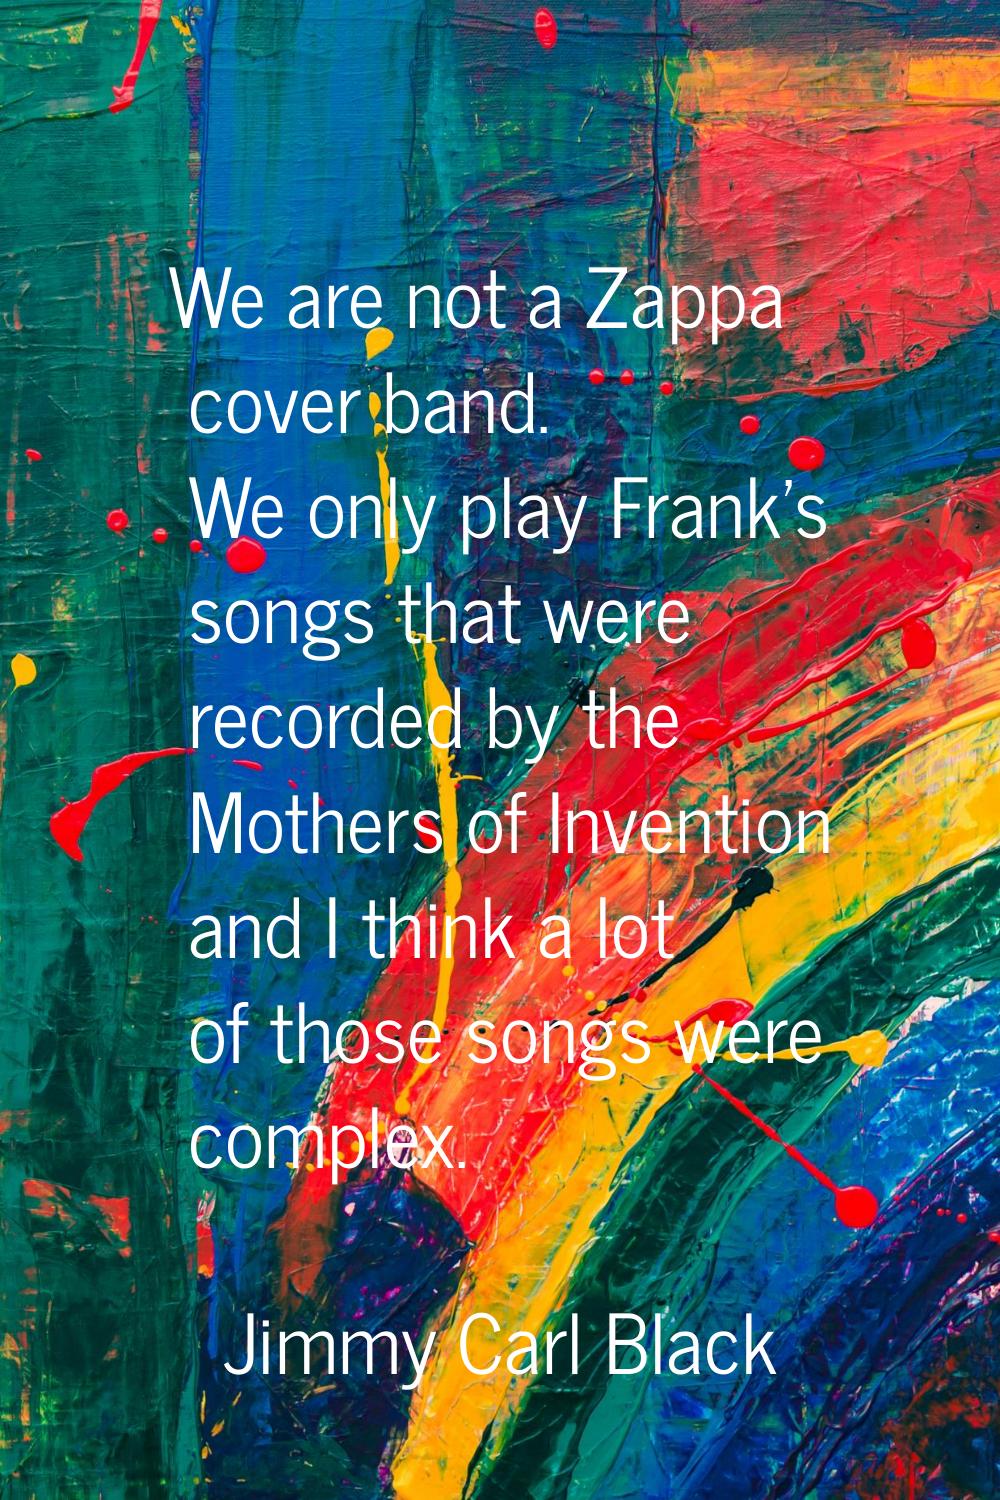 We are not a Zappa cover band. We only play Frank's songs that were recorded by the Mothers of Inve